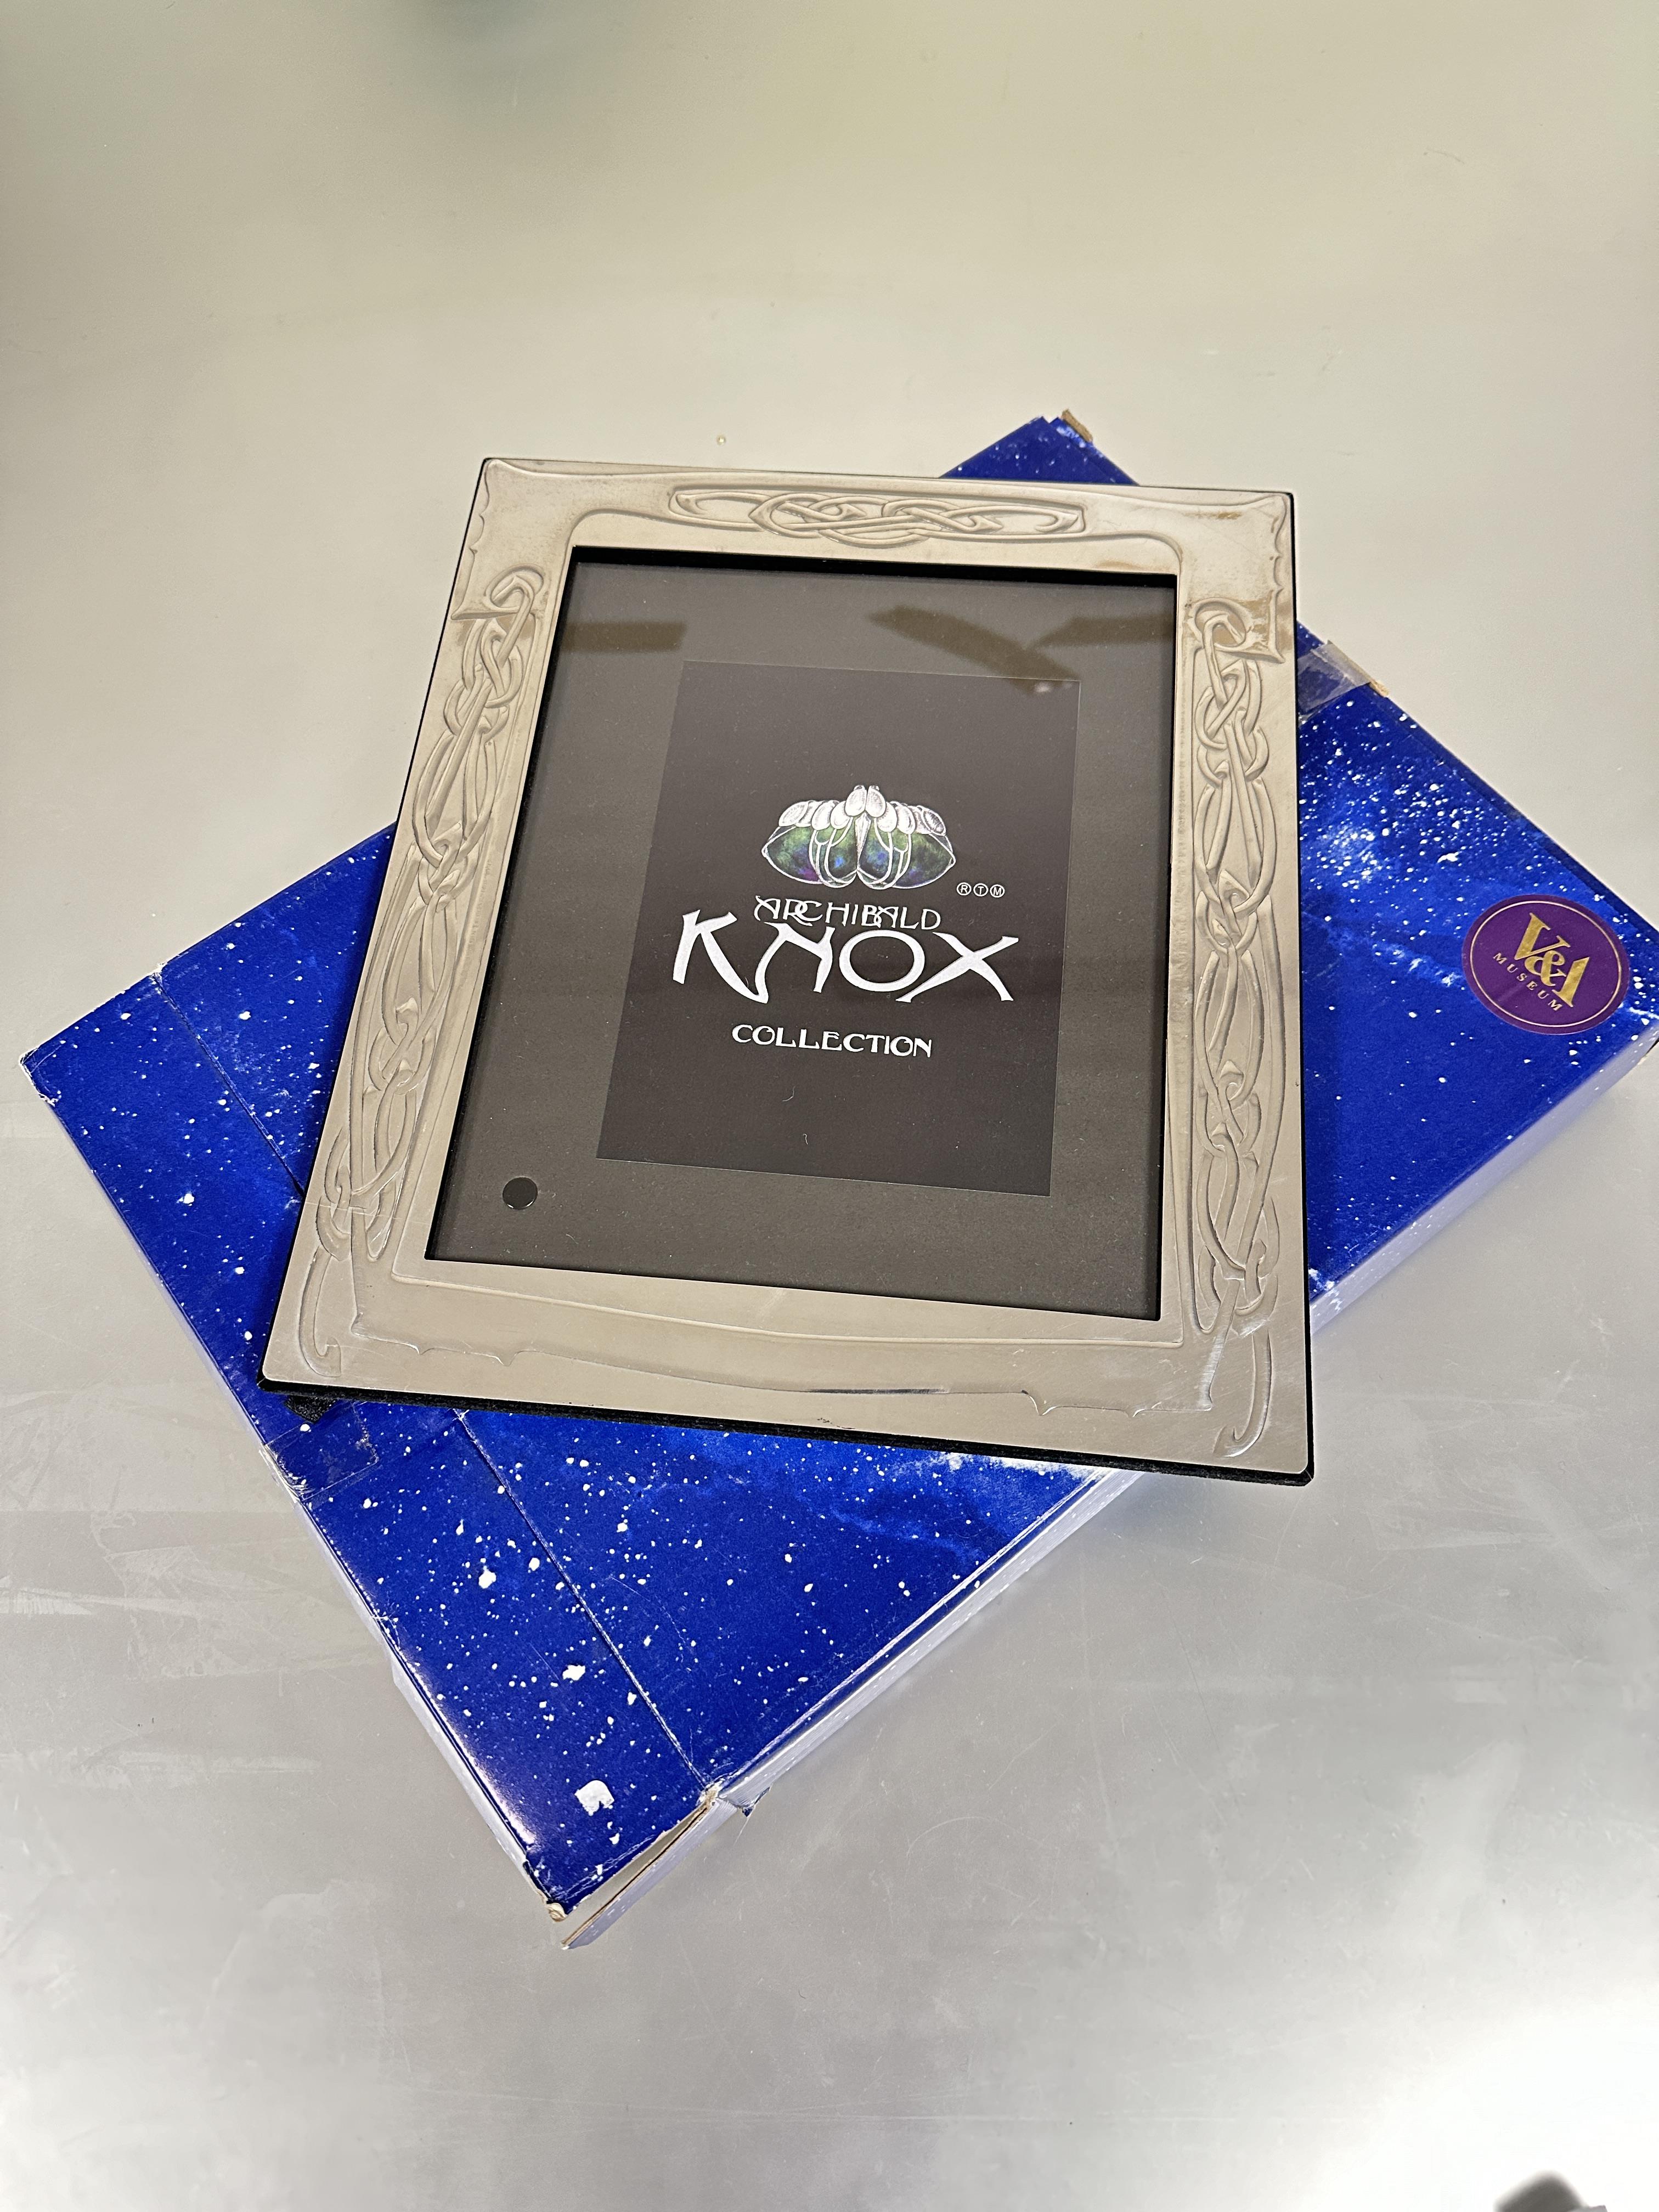 A Royal Selangor Archibald Knox collection pewter large photograph frame with stylized scrolling